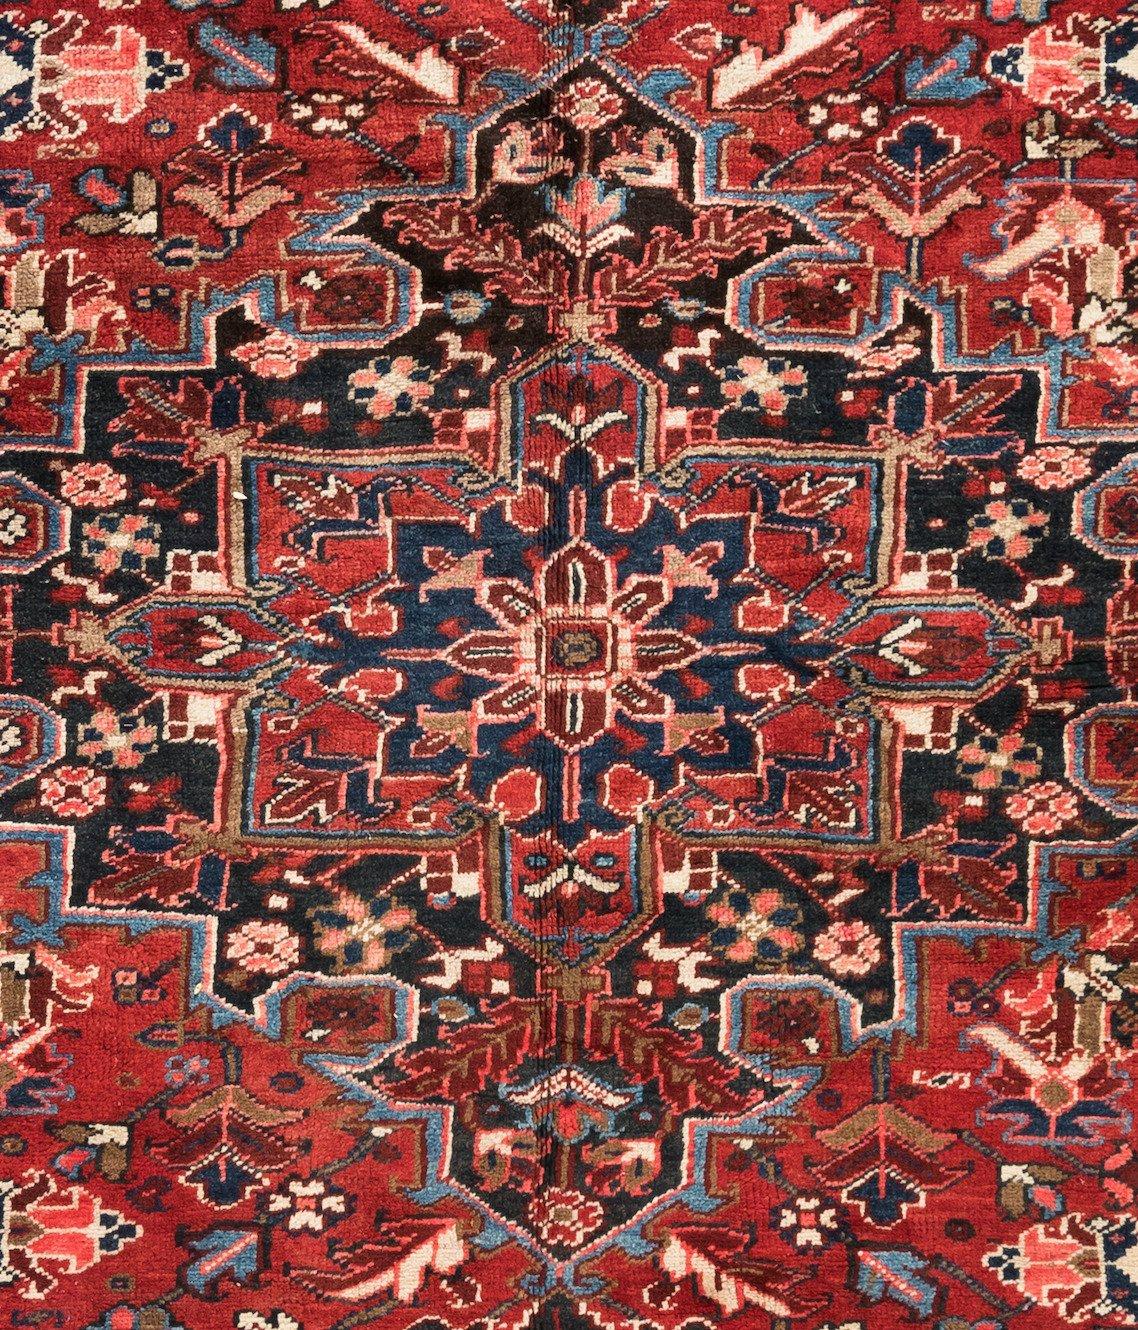 Heriz rugs are one of the most famous rugs from Iran, because of their very unique and distinguishable style. Heriz is a city located in northwestern Iran, near the city of Tabriz, which is a major rug-weaving center in Iran. Most often, Heriz rugs